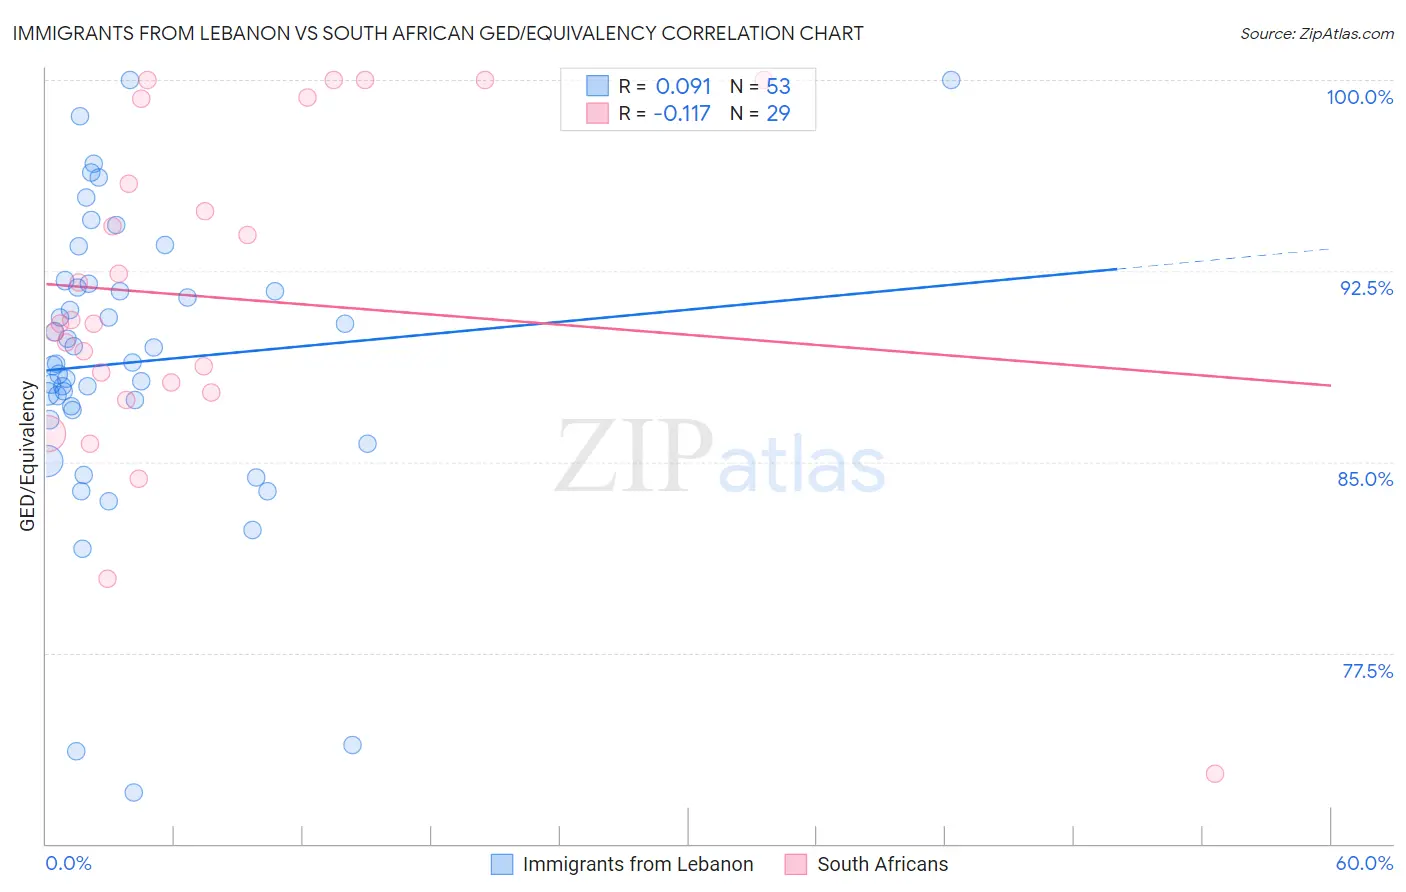 Immigrants from Lebanon vs South African GED/Equivalency